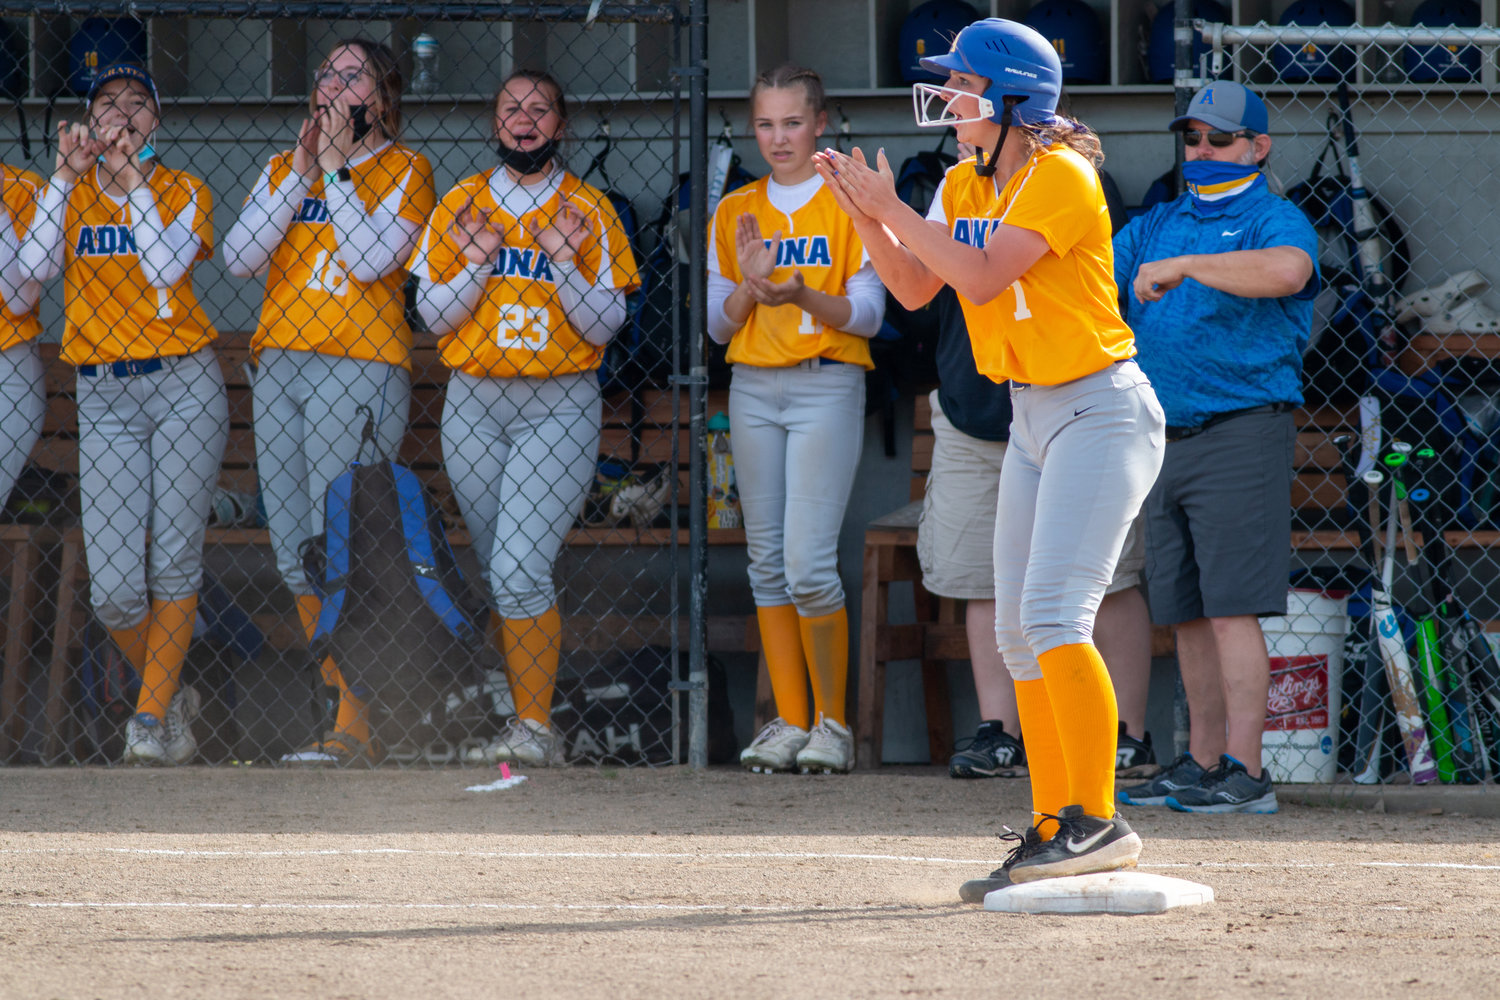 Adna senior Haley Rainey claps while her teammates celebrate before beating Ocosta in the district semifinals on Thursday.